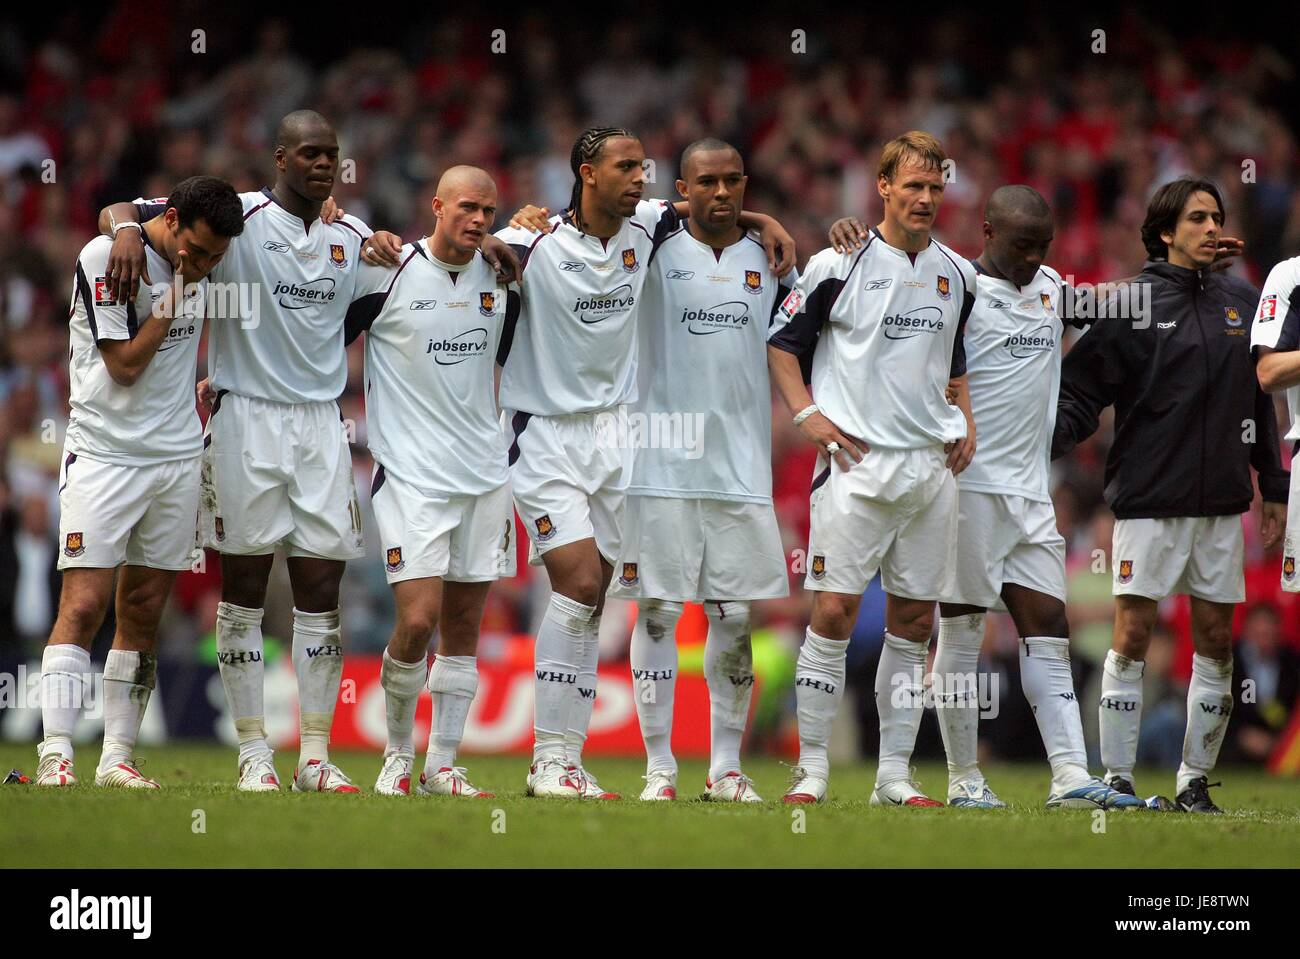 Normalisering vride ortodoks DEJECTED WEST HAM PLAYERS THE FA CUP FINAL MILLENNIUM STADIUM CARDIFF WALES  13 May 2006 Stock Photo - Alamy